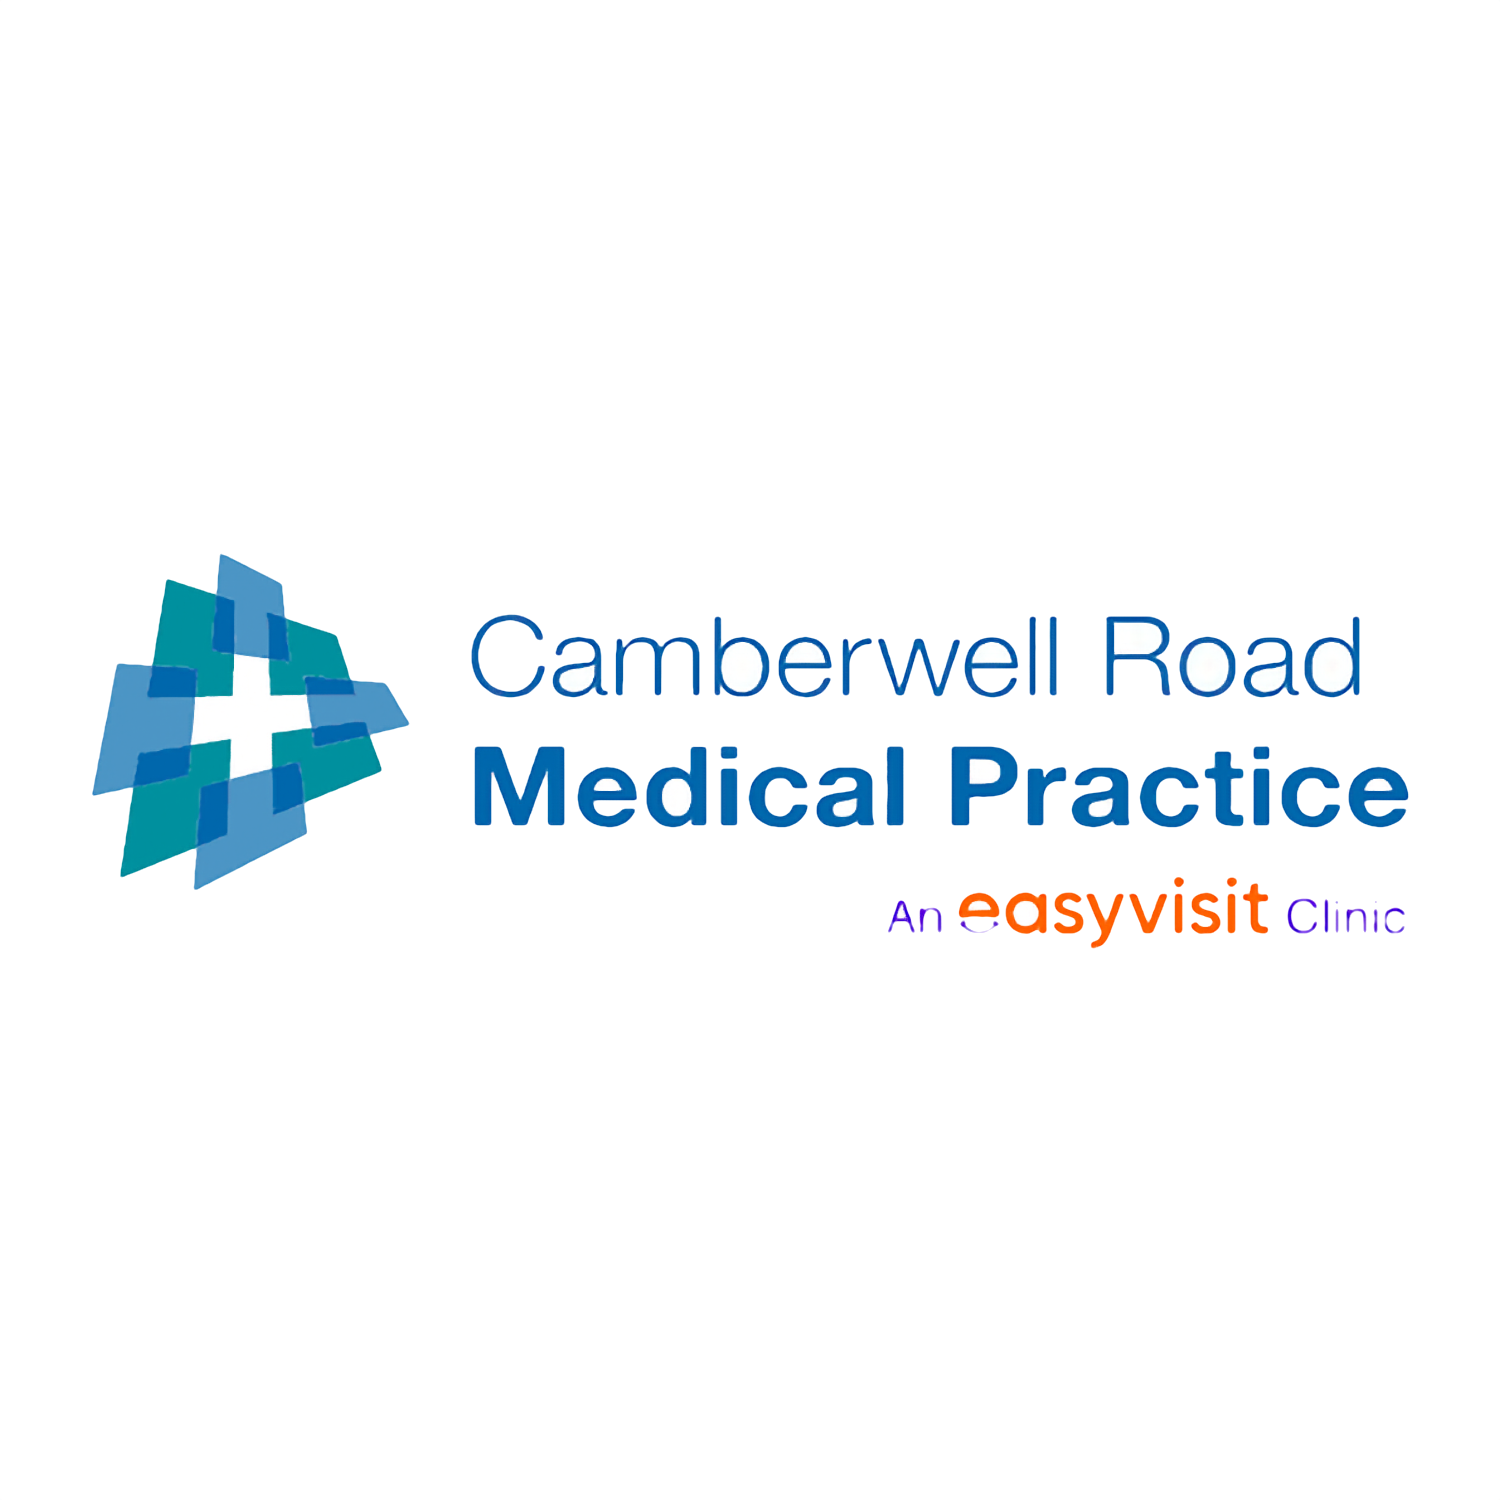 Camberwell Road Medical Practice